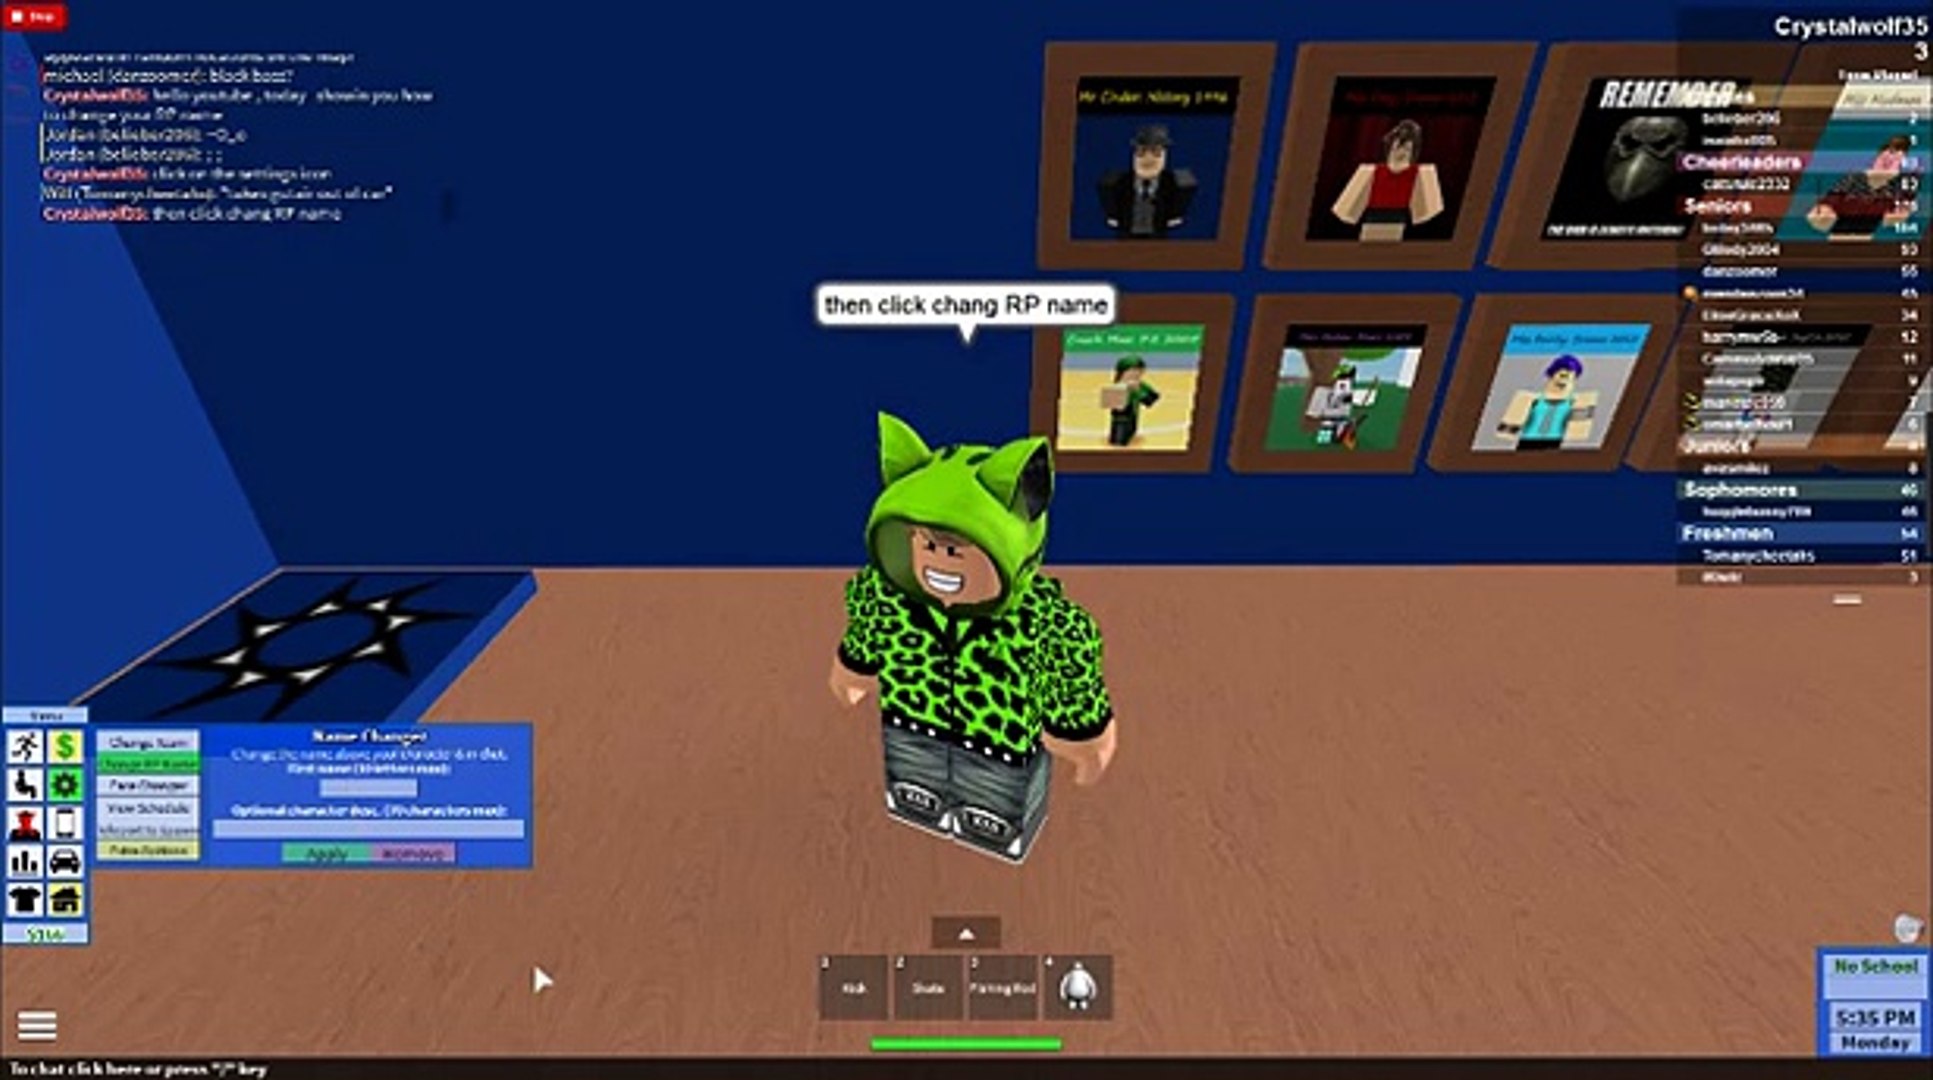 Roblox High School Rp Name Changing Tutorial Video Dailymotion - roblox video tutorials school